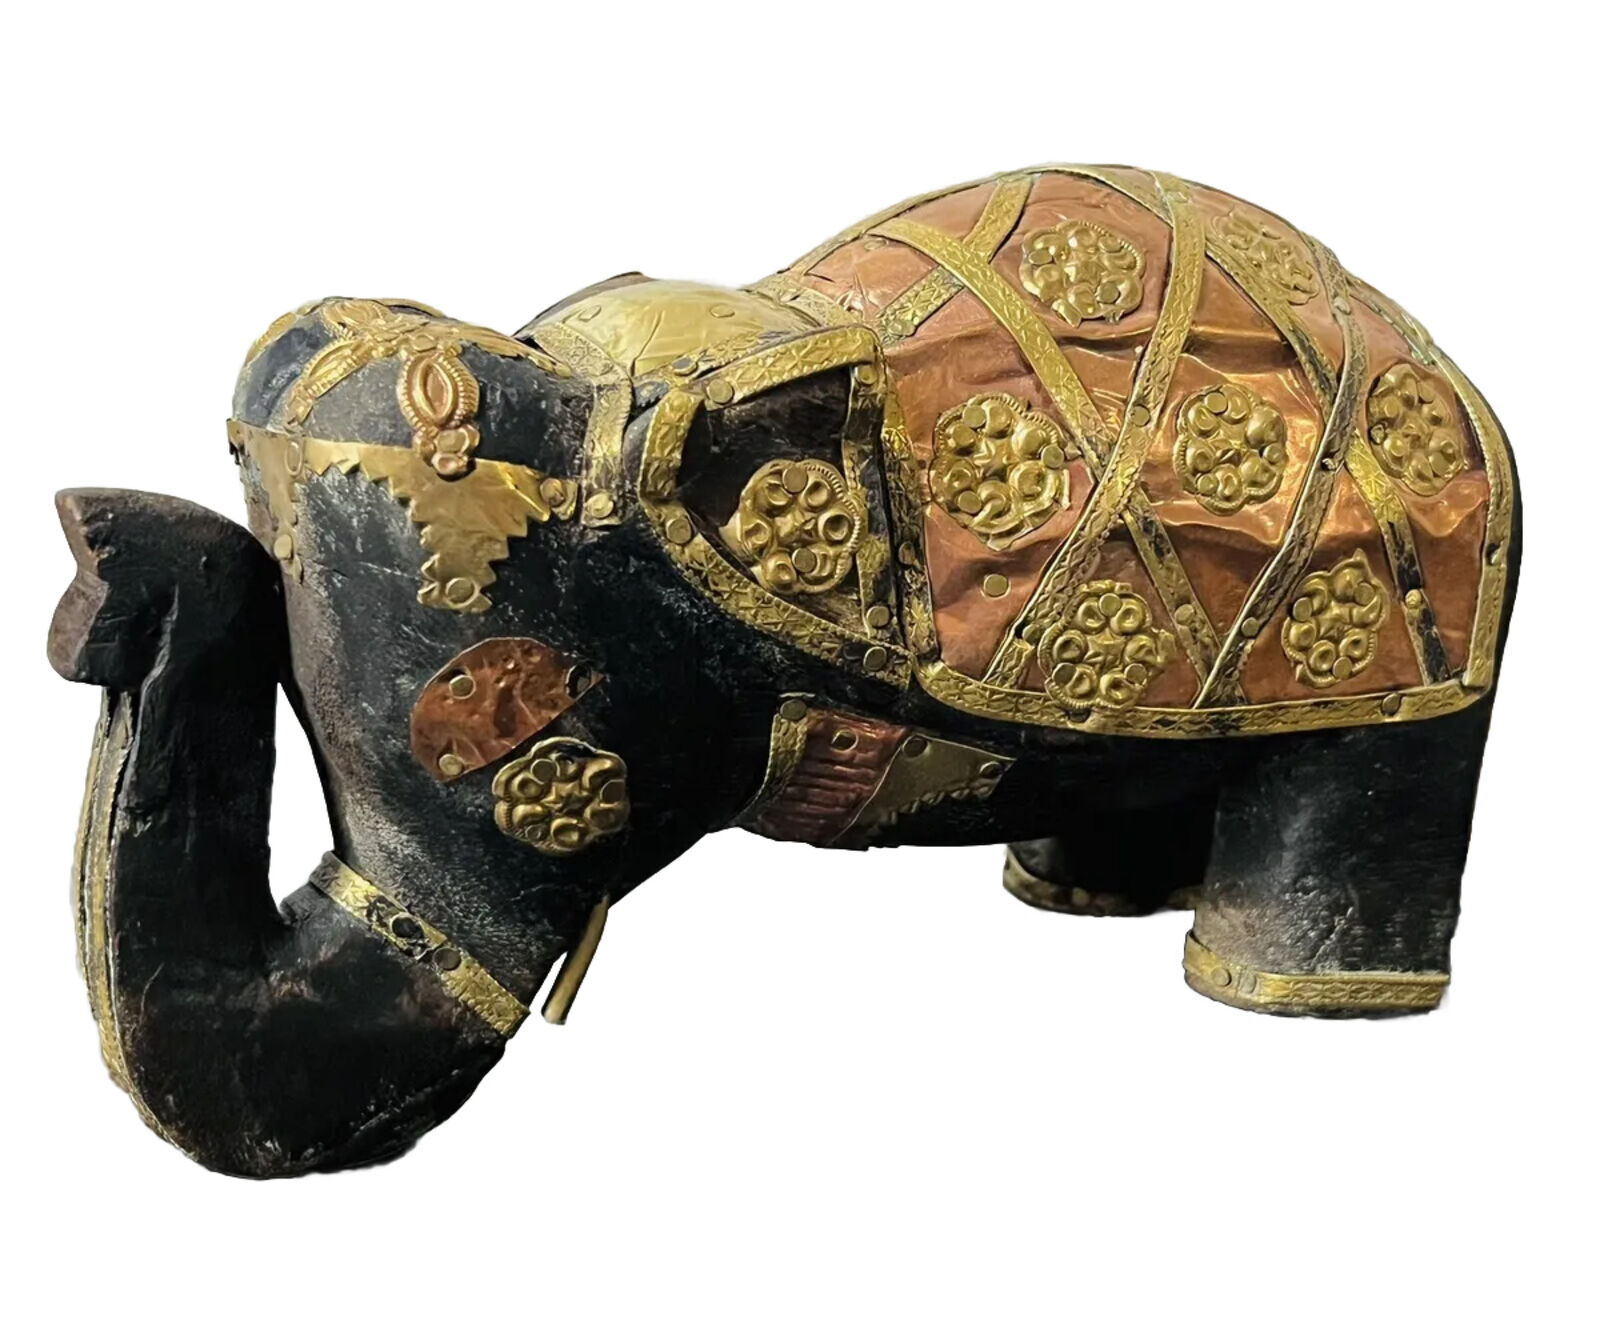 Vintage Carved Elephant Decorated in Aged Brass Copper Made in India Handmade